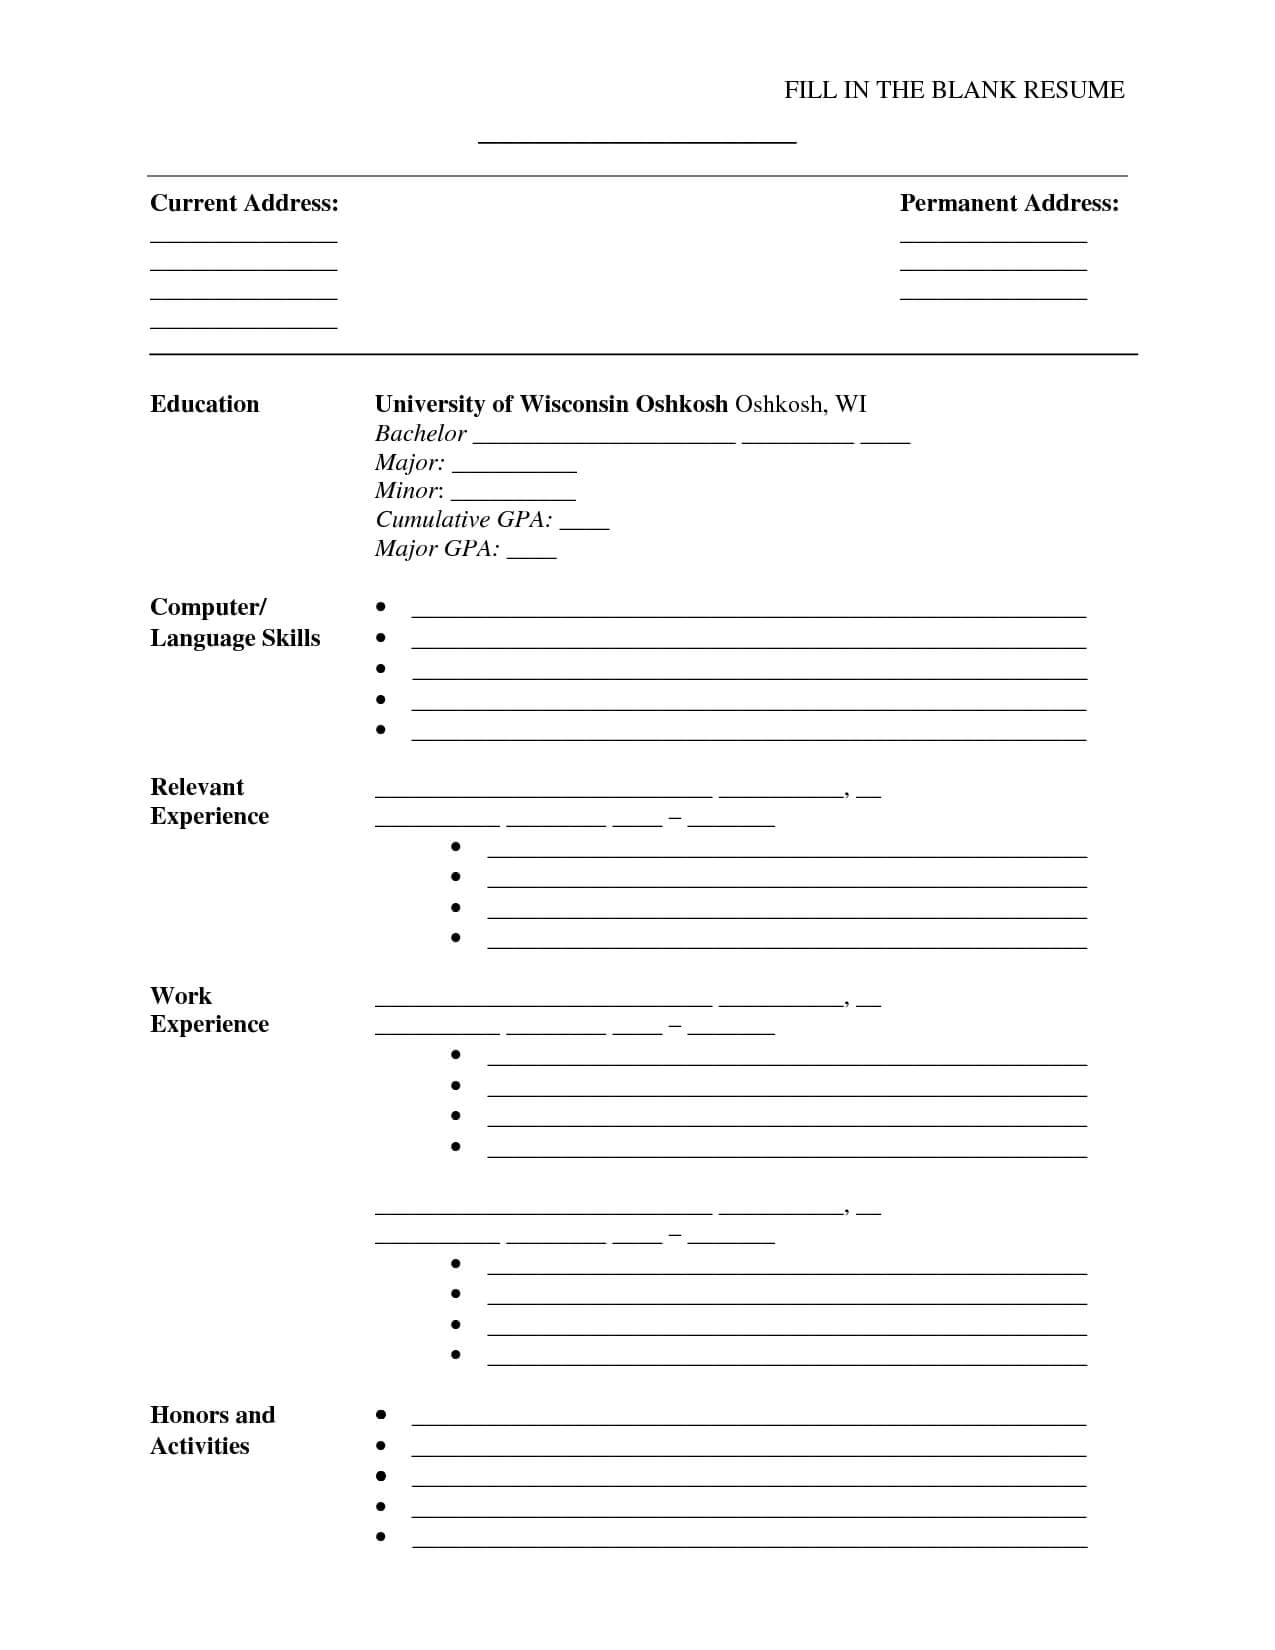 A Cv Template To Fill In | Free Printable Resume, Free In Blank Resume Templates For Microsoft Word